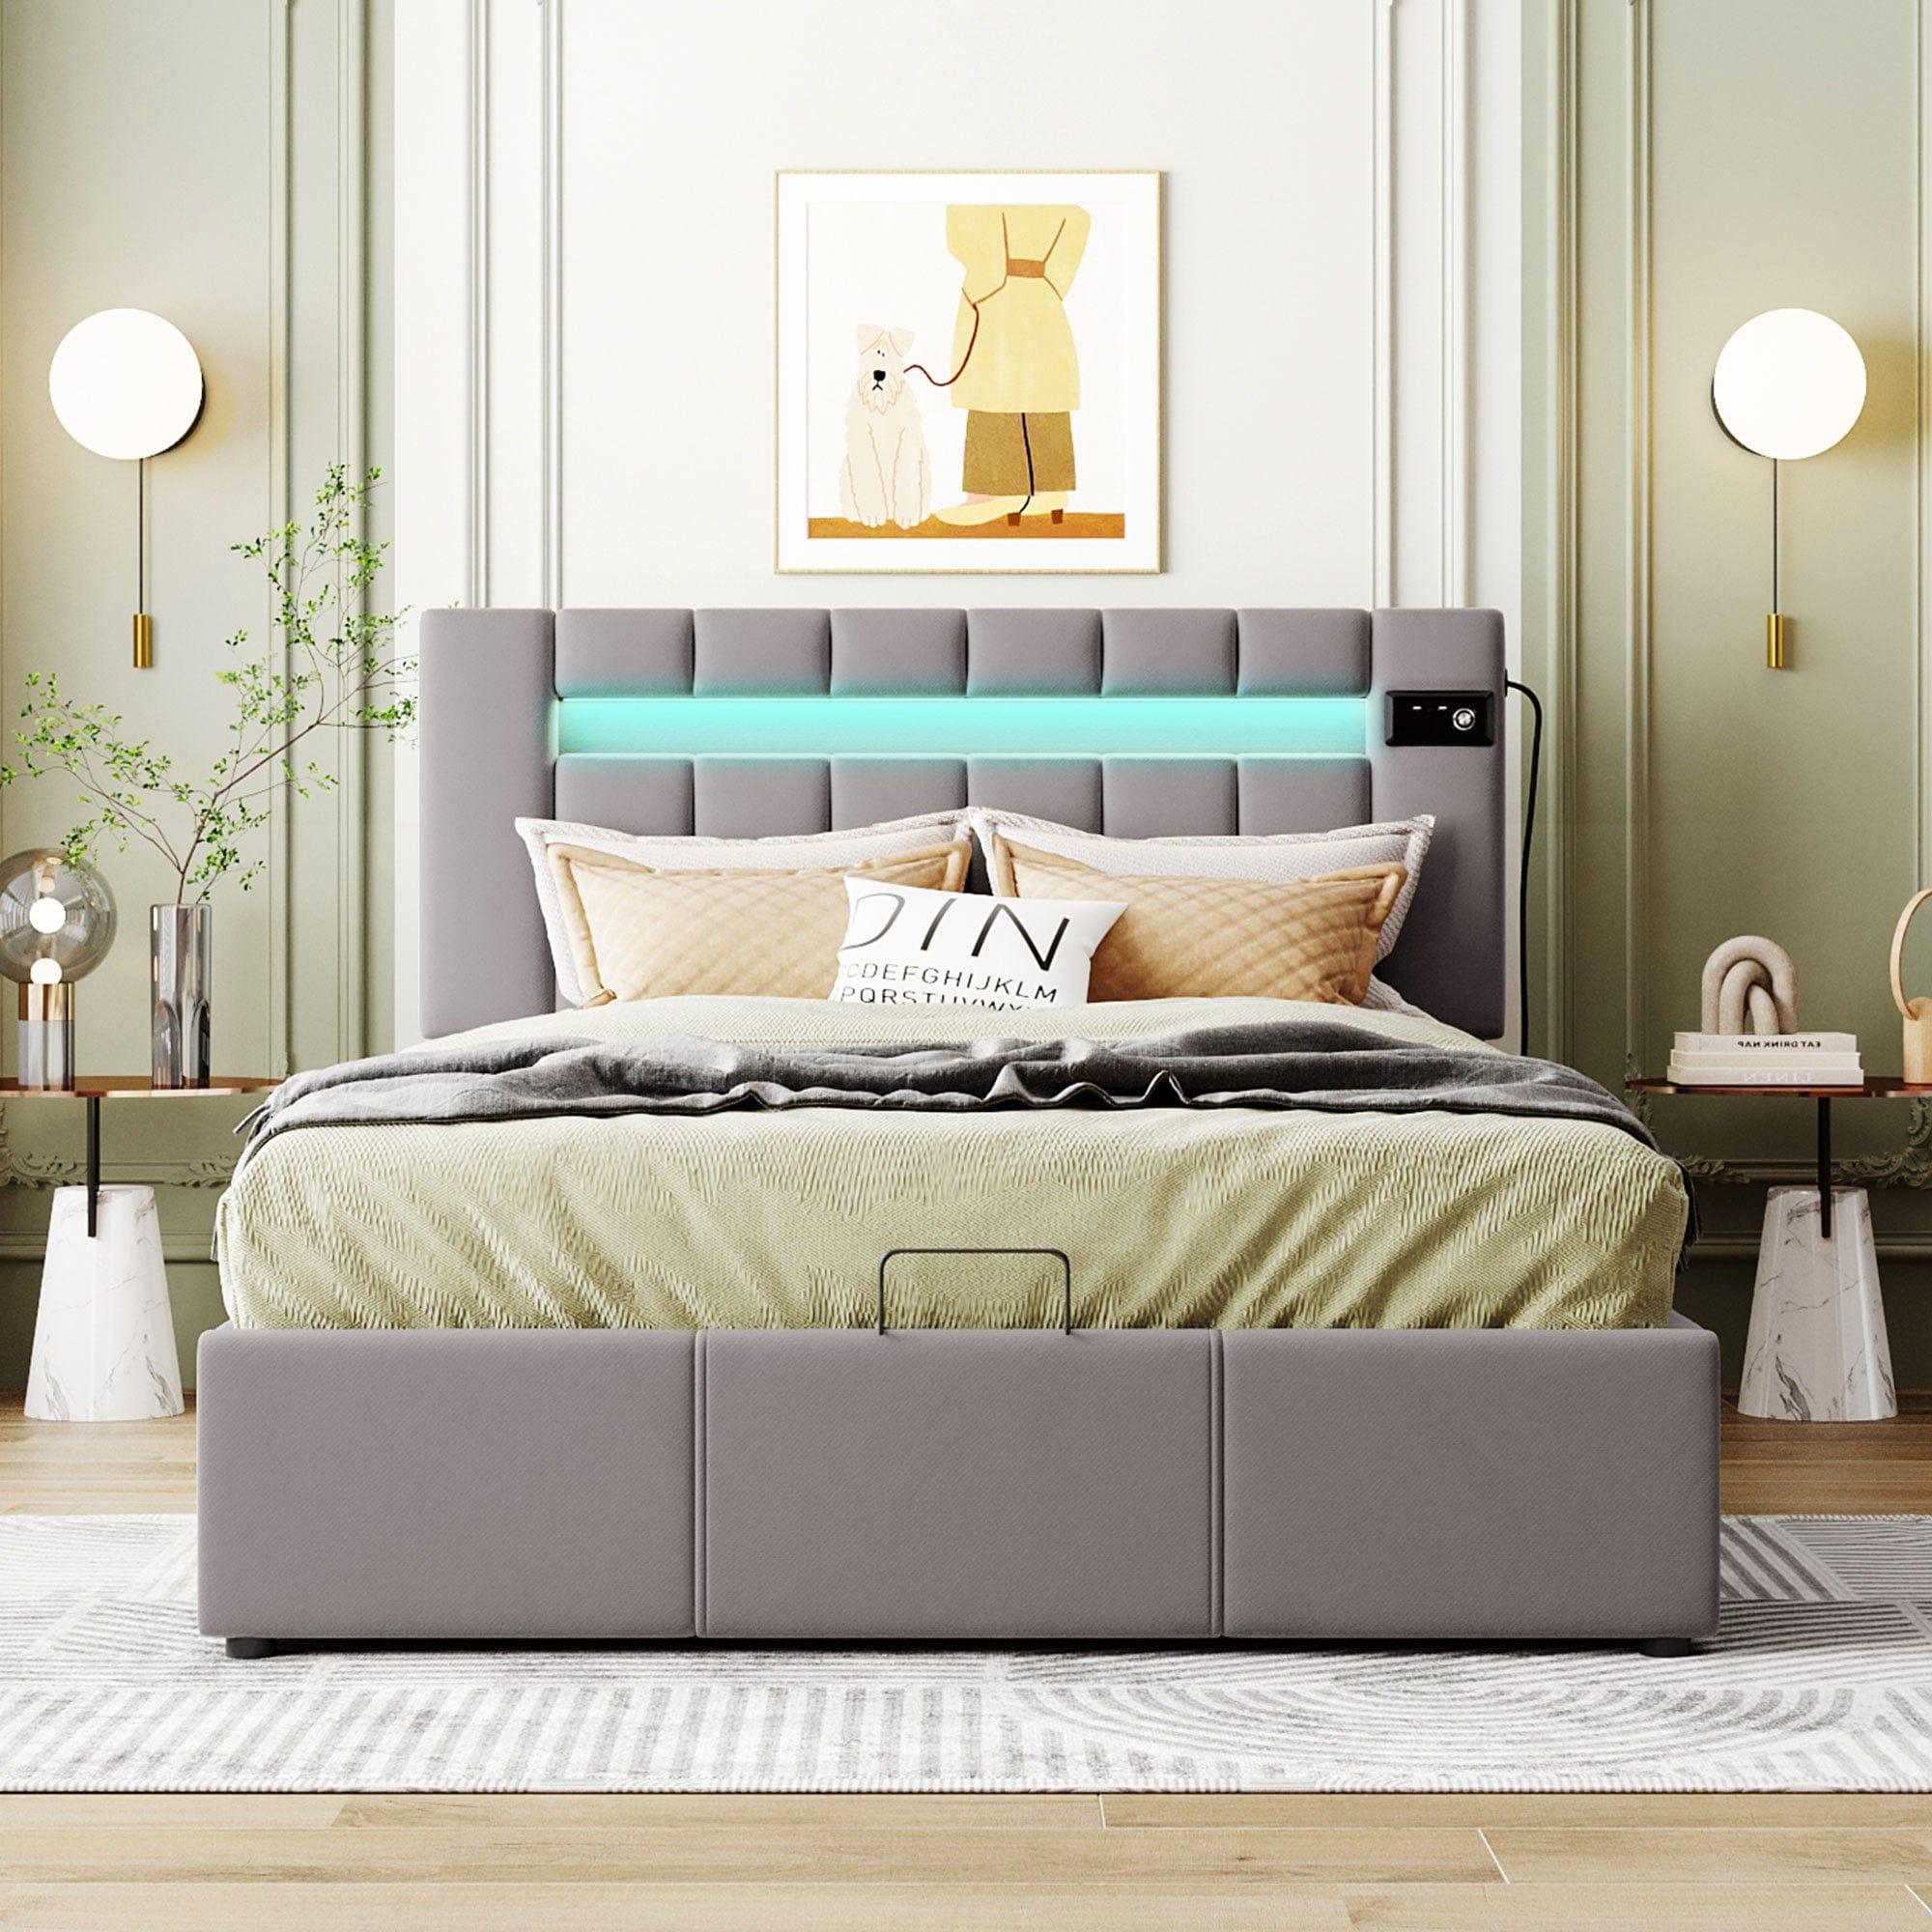 Shop Upholstered Bed Full Size with LED light, Bluetooth Player and USB Charging, Hydraulic Storage Bed in Gray Velvet Fabric Mademoiselle Home Decor